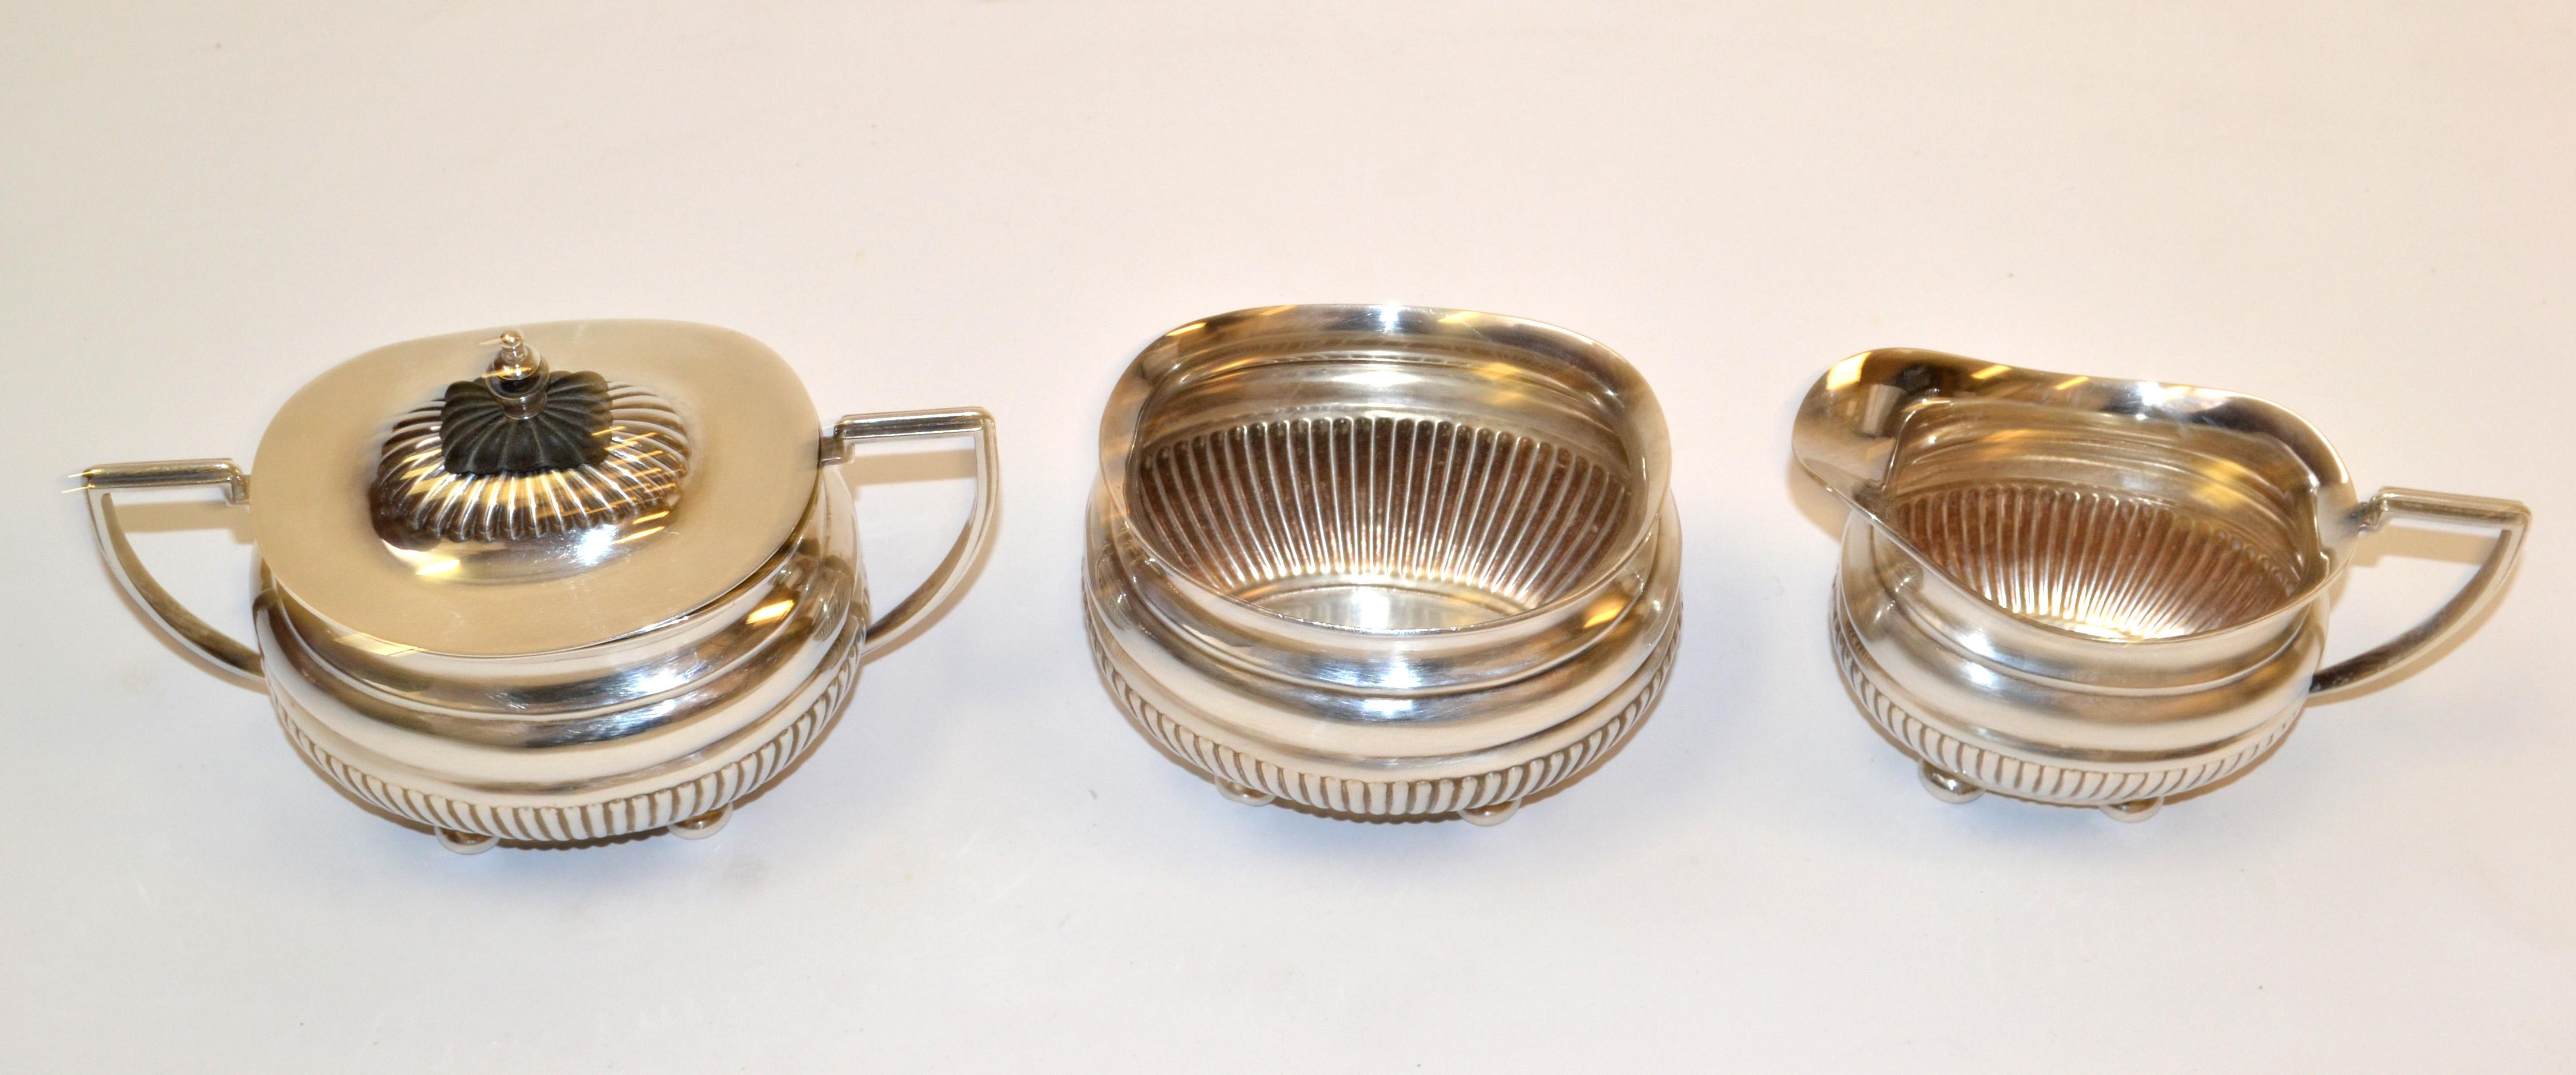 Hand-Crafted British Colonial Antique 1910 Cheltenham Silver Coffee Service Sheffield England For Sale